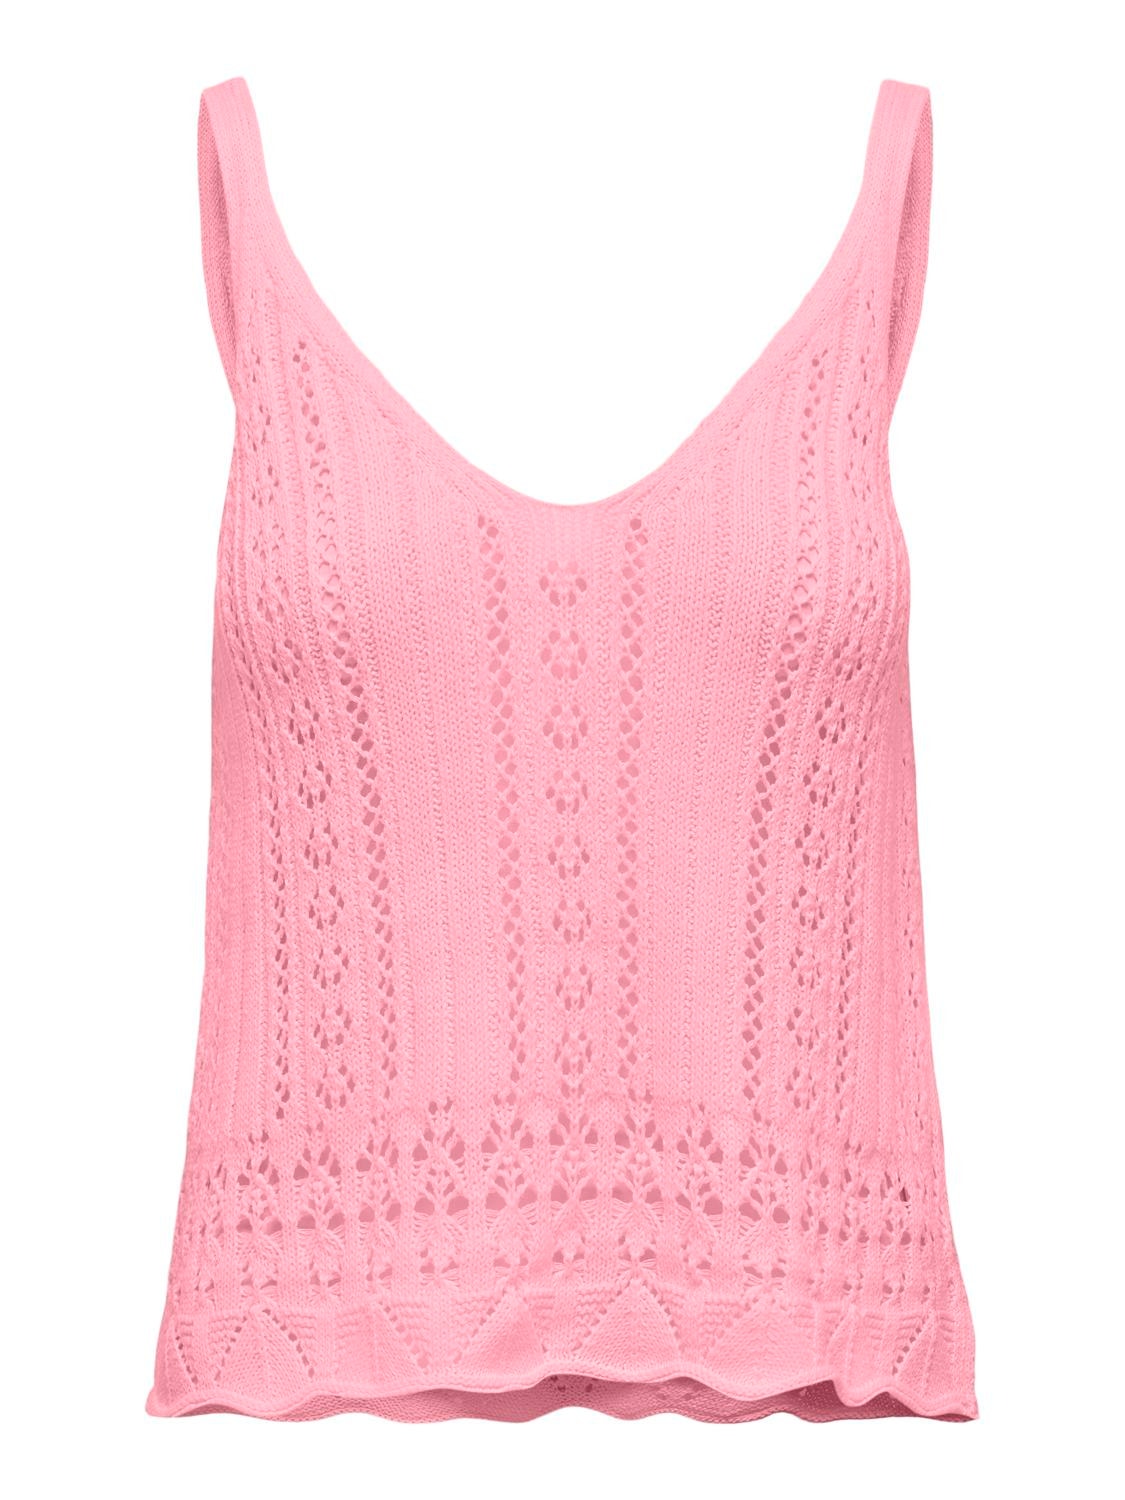 ONLY Sin mangas Top de punto -Candy Pink - 15277573